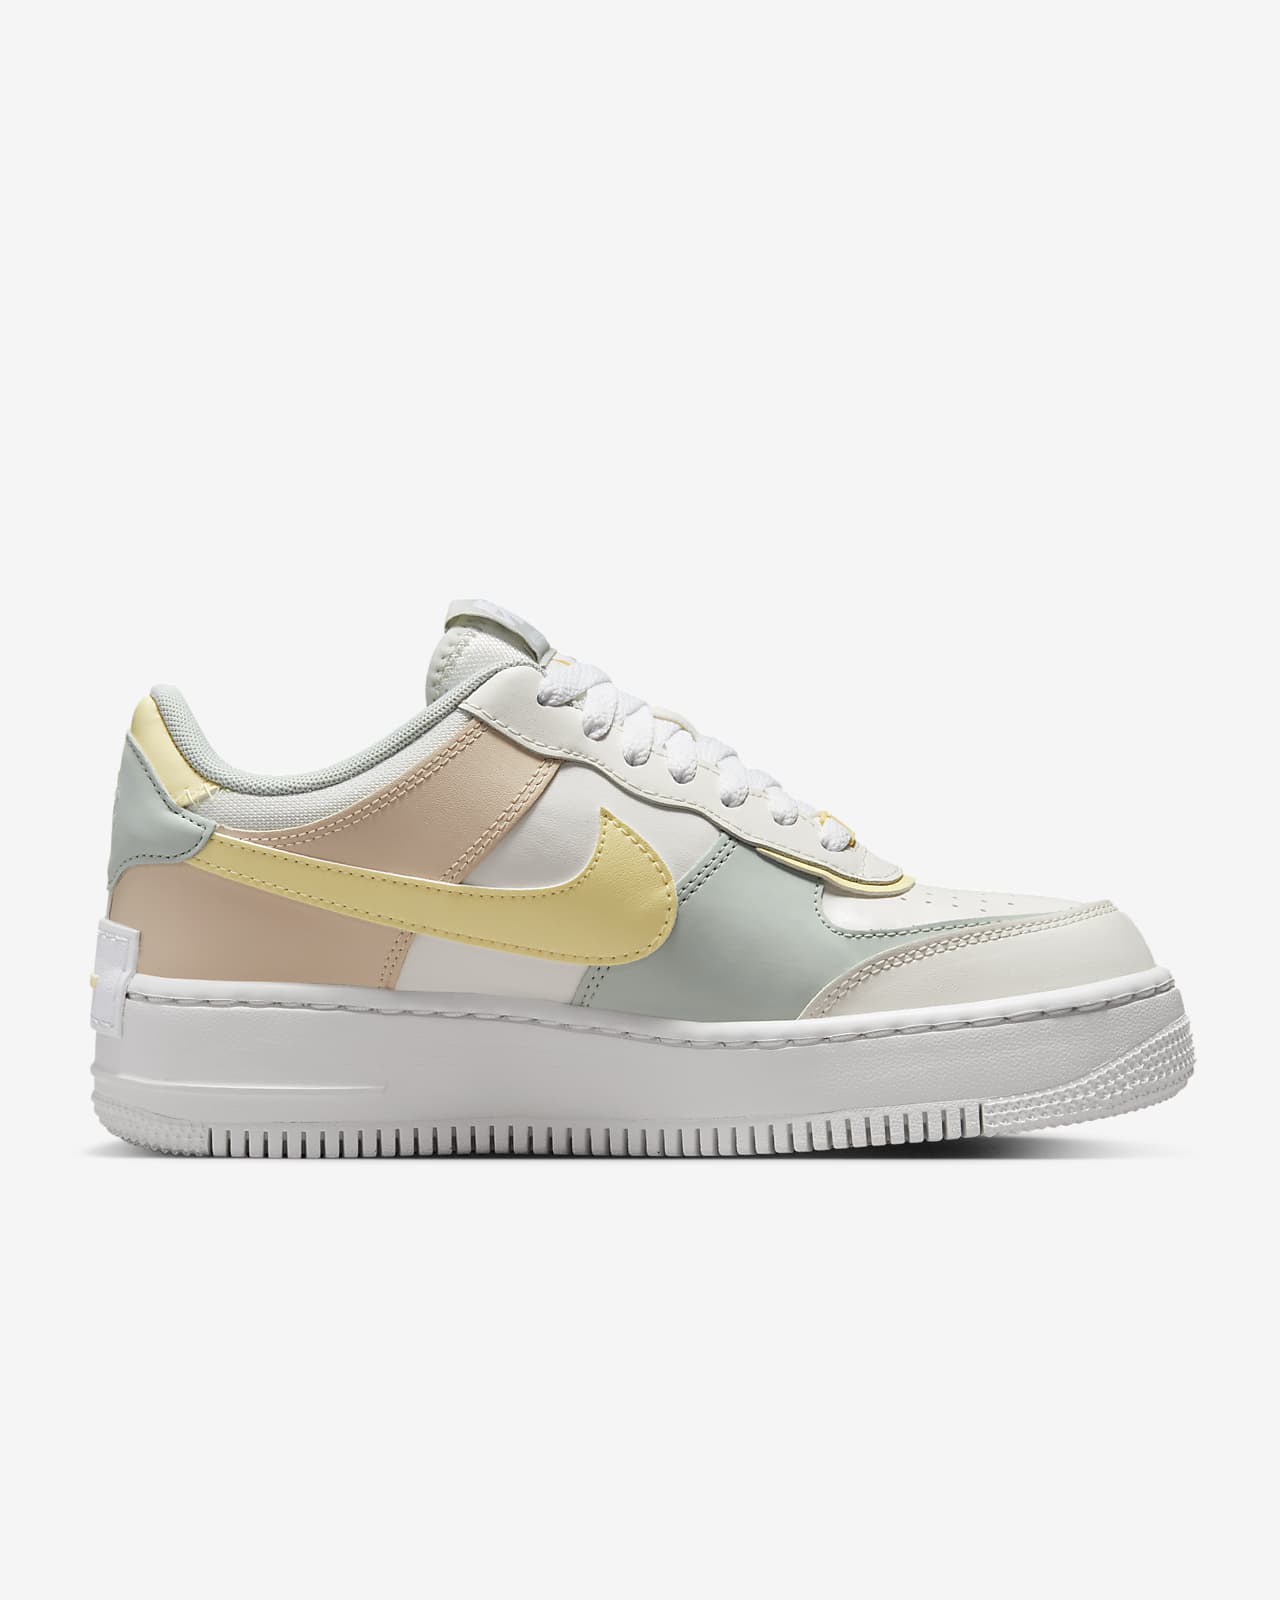 Nike AF1 Shadow Women's Shoes